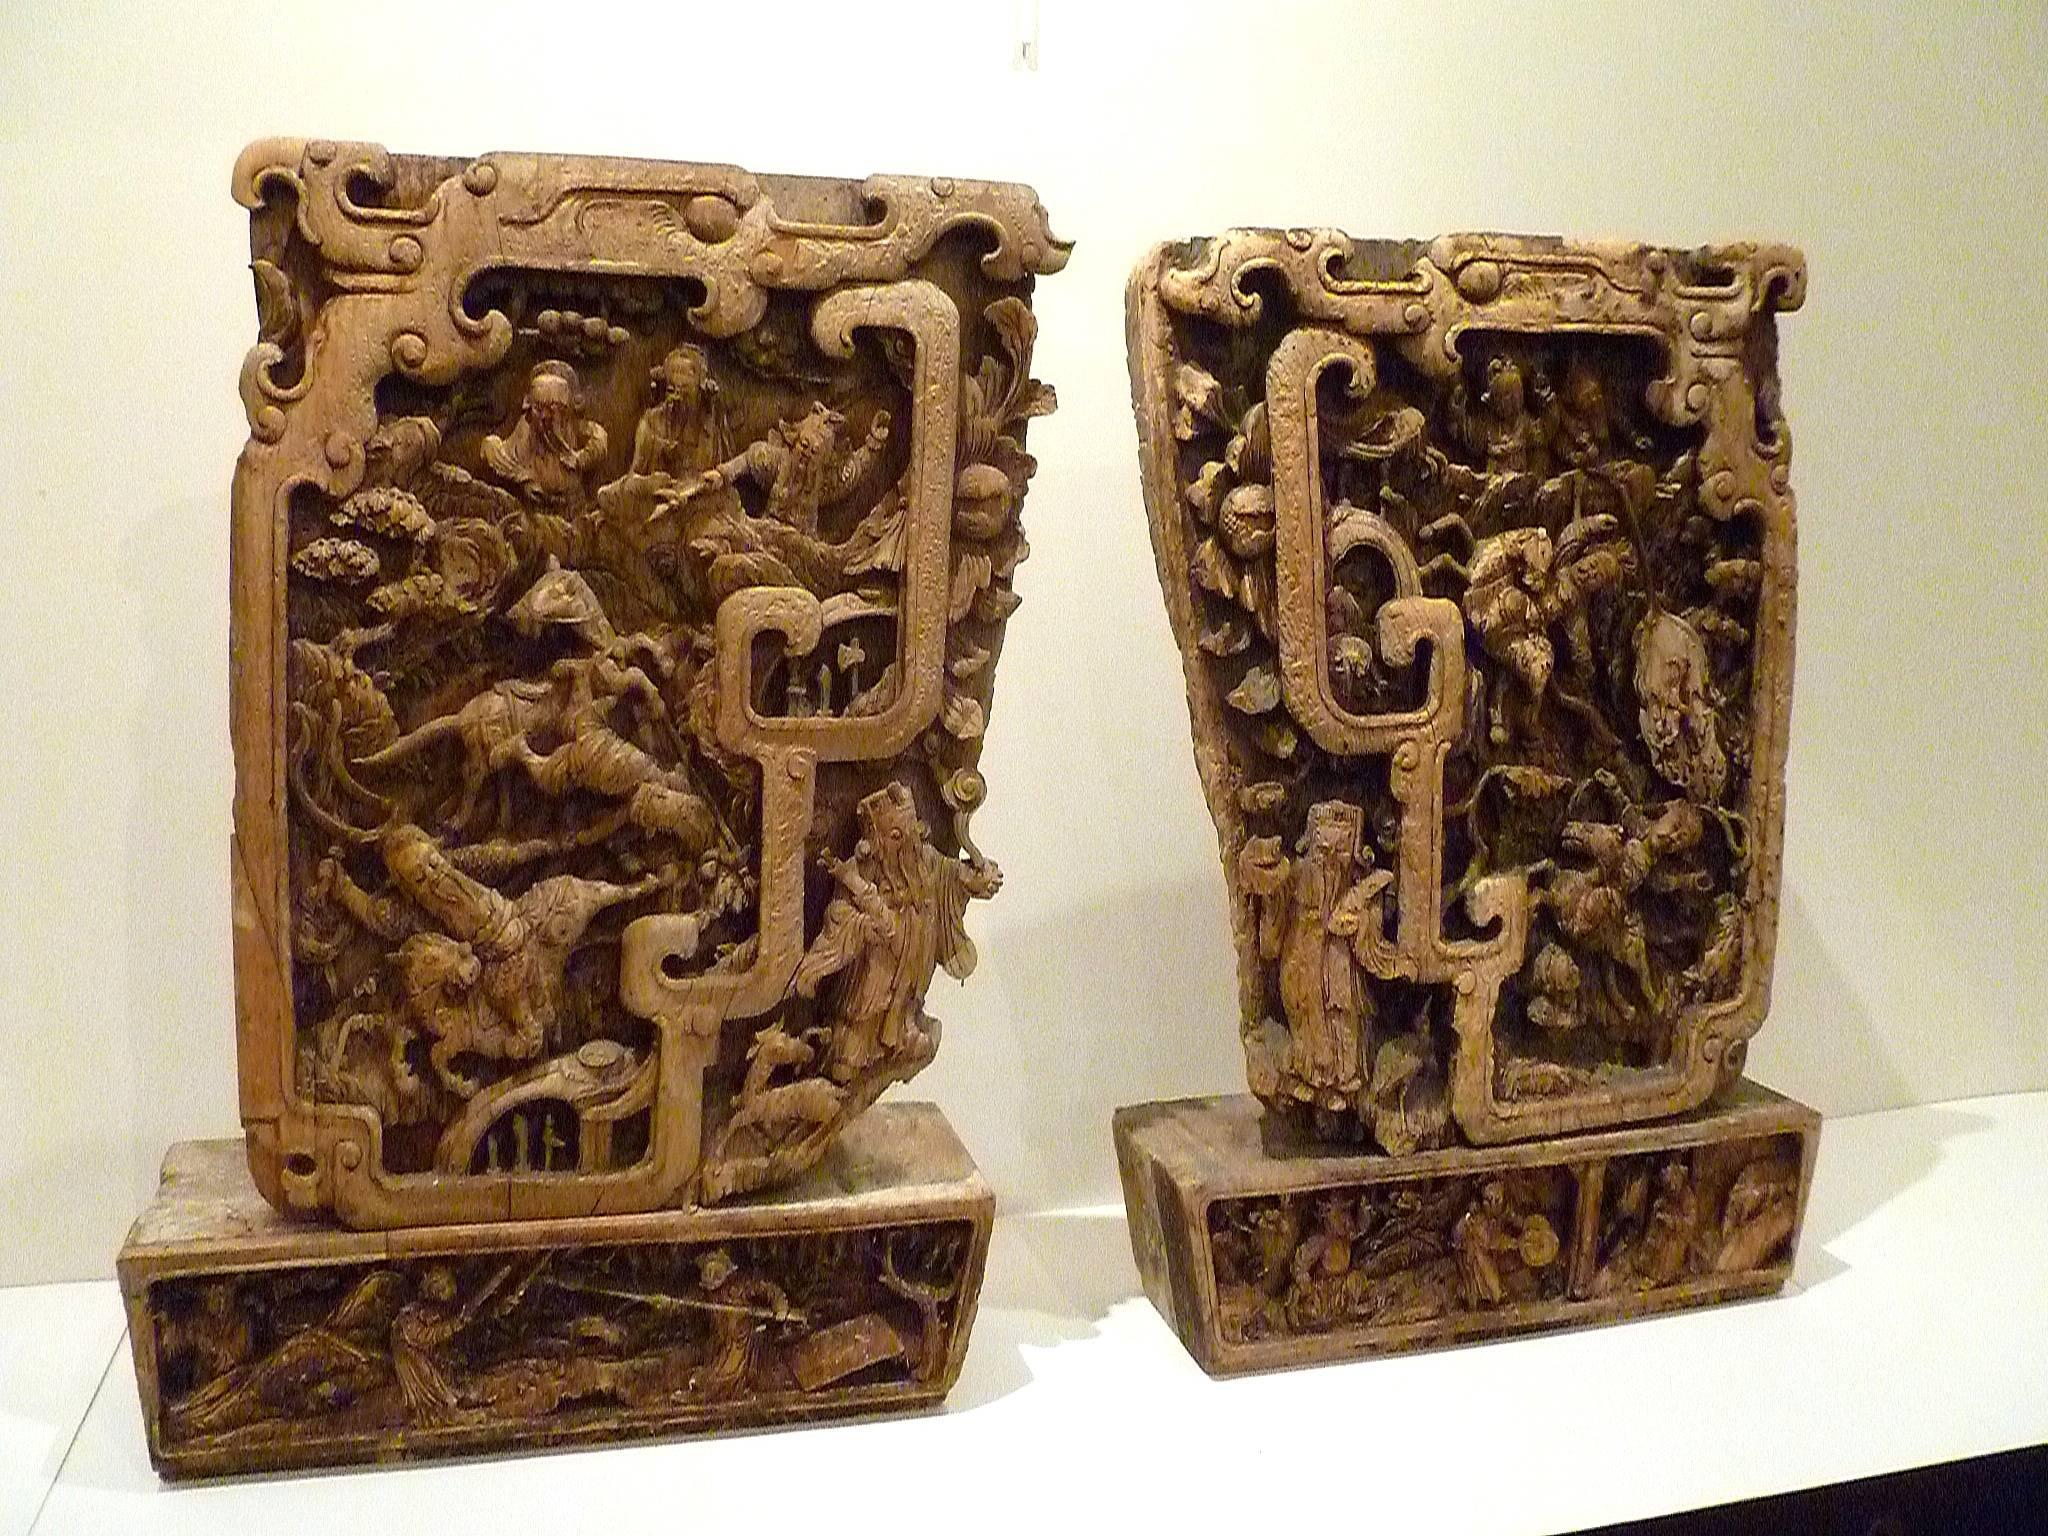 Pair of Qing dynasty architecture carving panels, detail carvings with warriors riding horses.